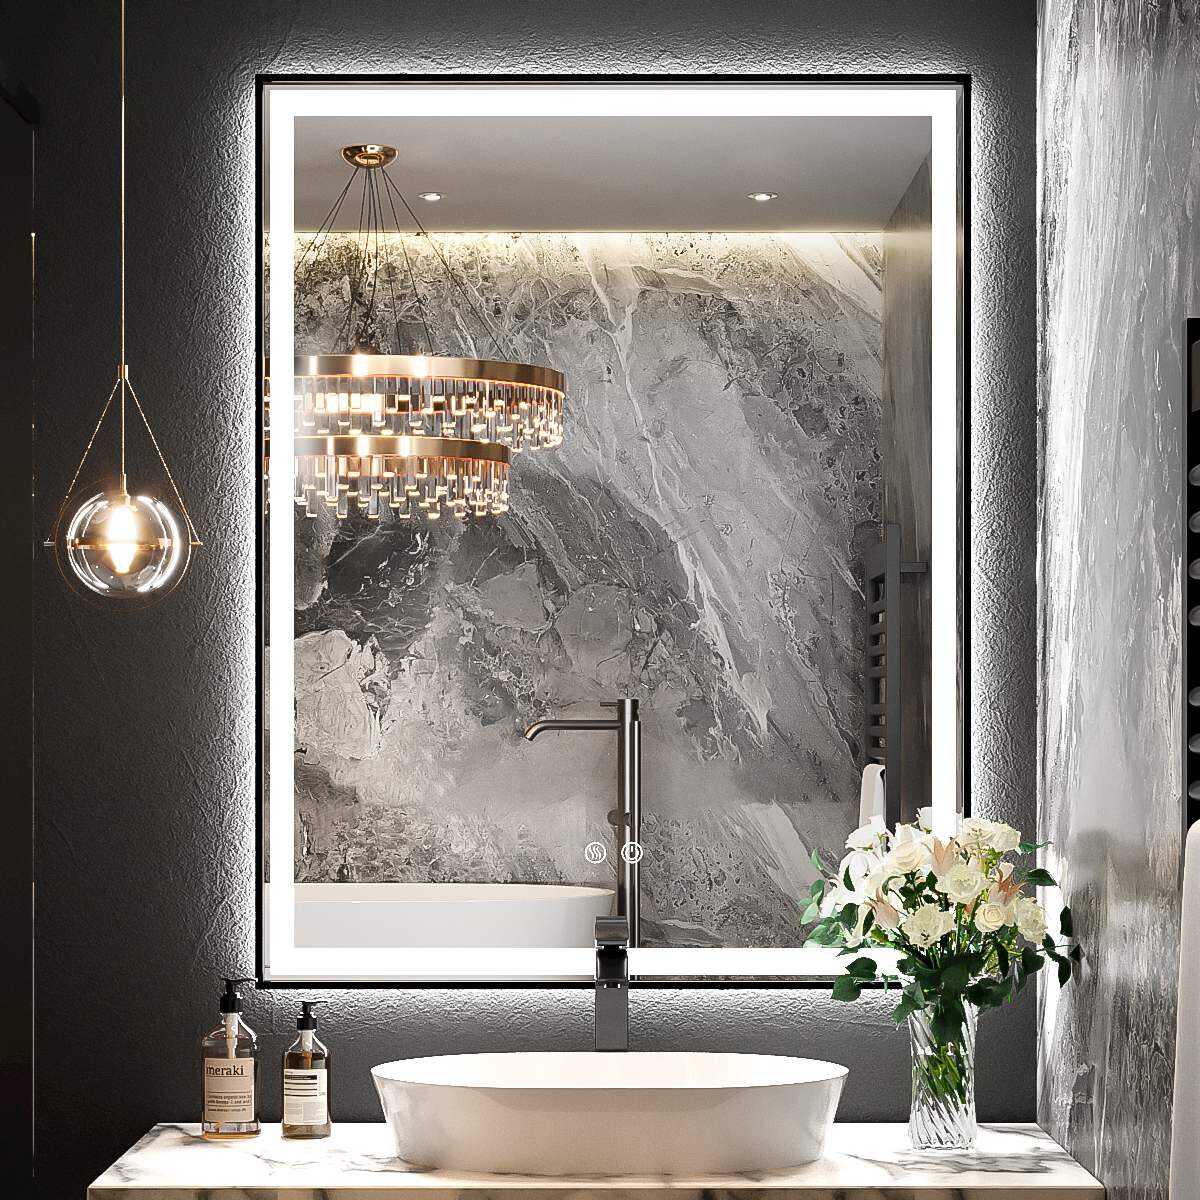 JJGullit bathroom mirror supplier LED Bathroom Mirror with Lights, 28x36 Inch Frontlit and Backlit Anti-Fog Bathroom Vanity Mirror, Stepless Dimmable, French Cleats Wall Mount Lighted Mirror